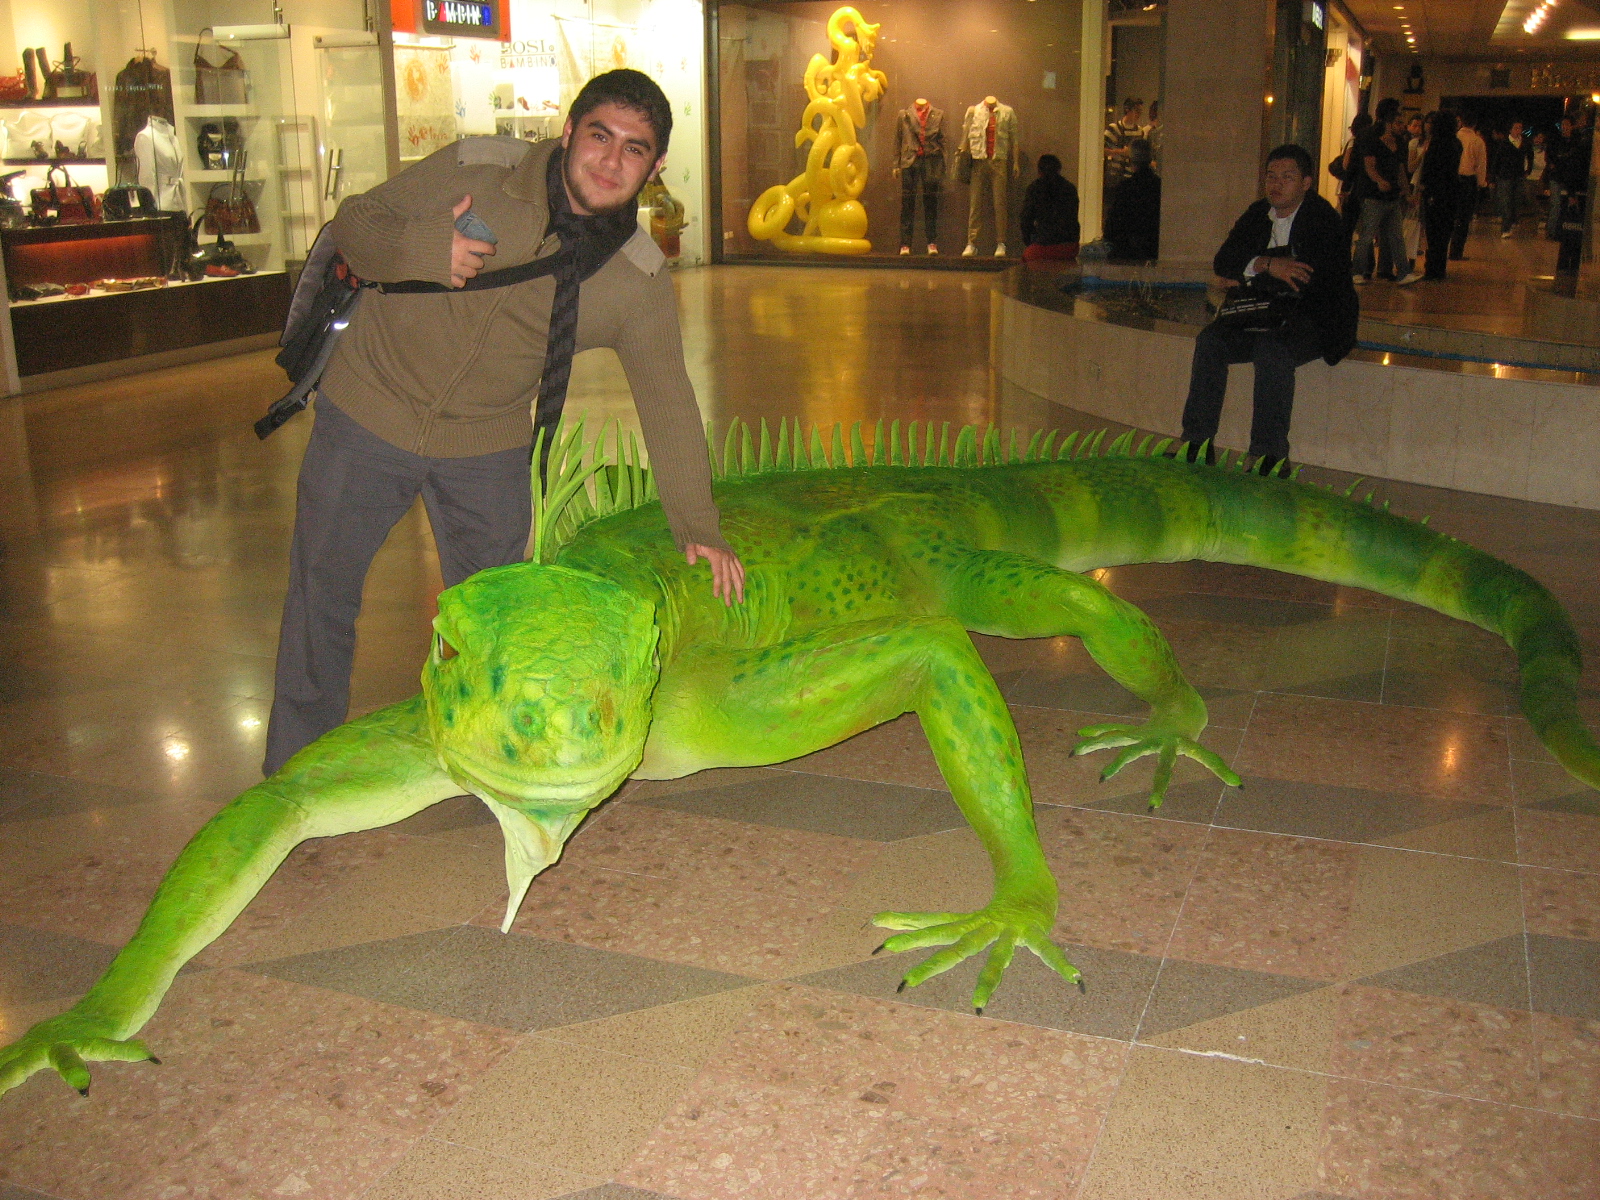 a large green lizard laying on the ground with a man in a brown shirt